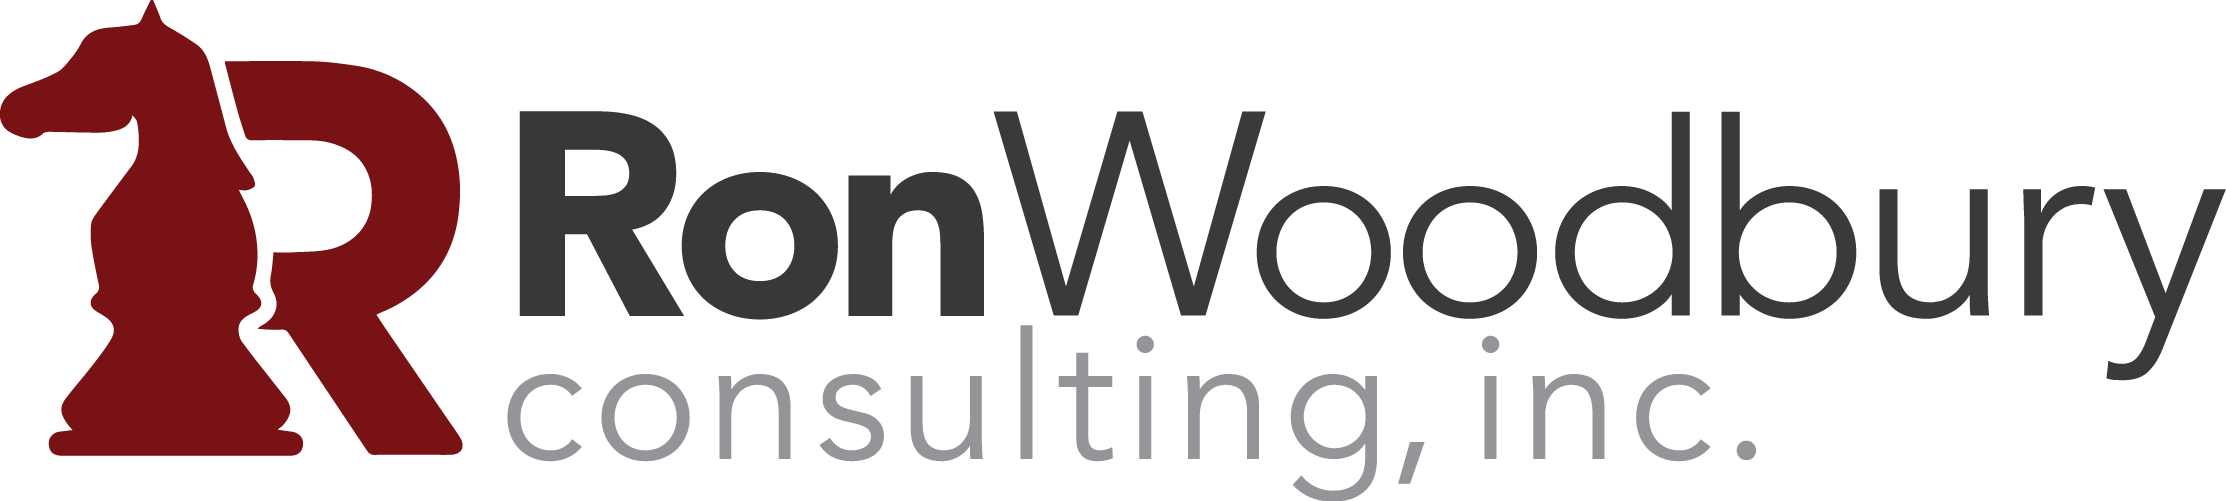 Ron Woodbury Consulting